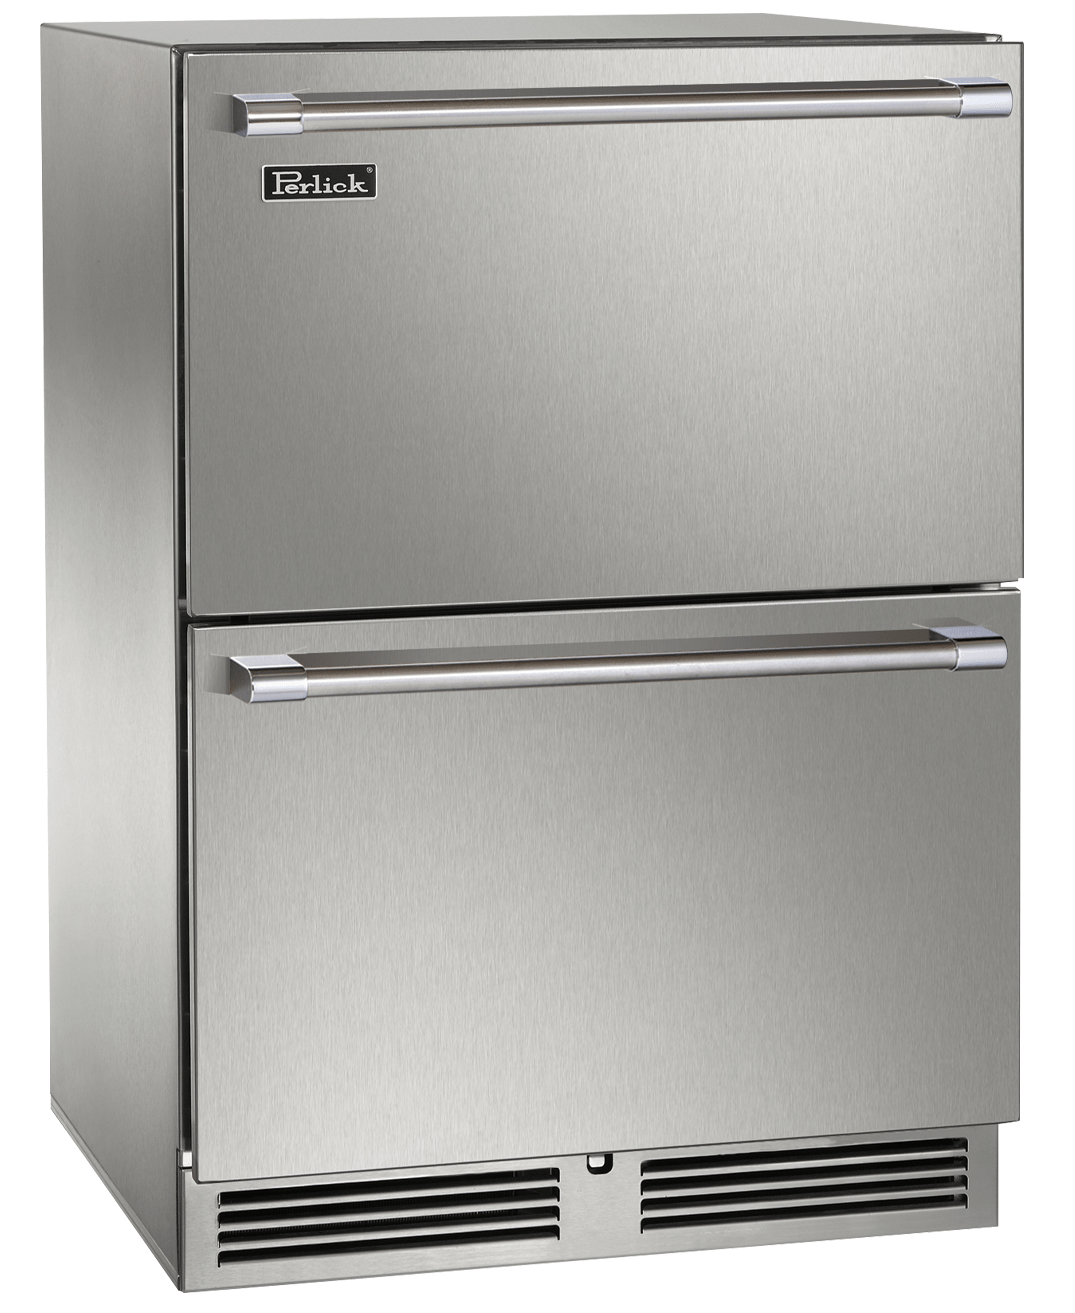 Perlick Refrigeration + Cooling Stainless Steel Drawers Perlick 24” Signature Series Refrigerated Drawers / HP24RO-4 Drawers